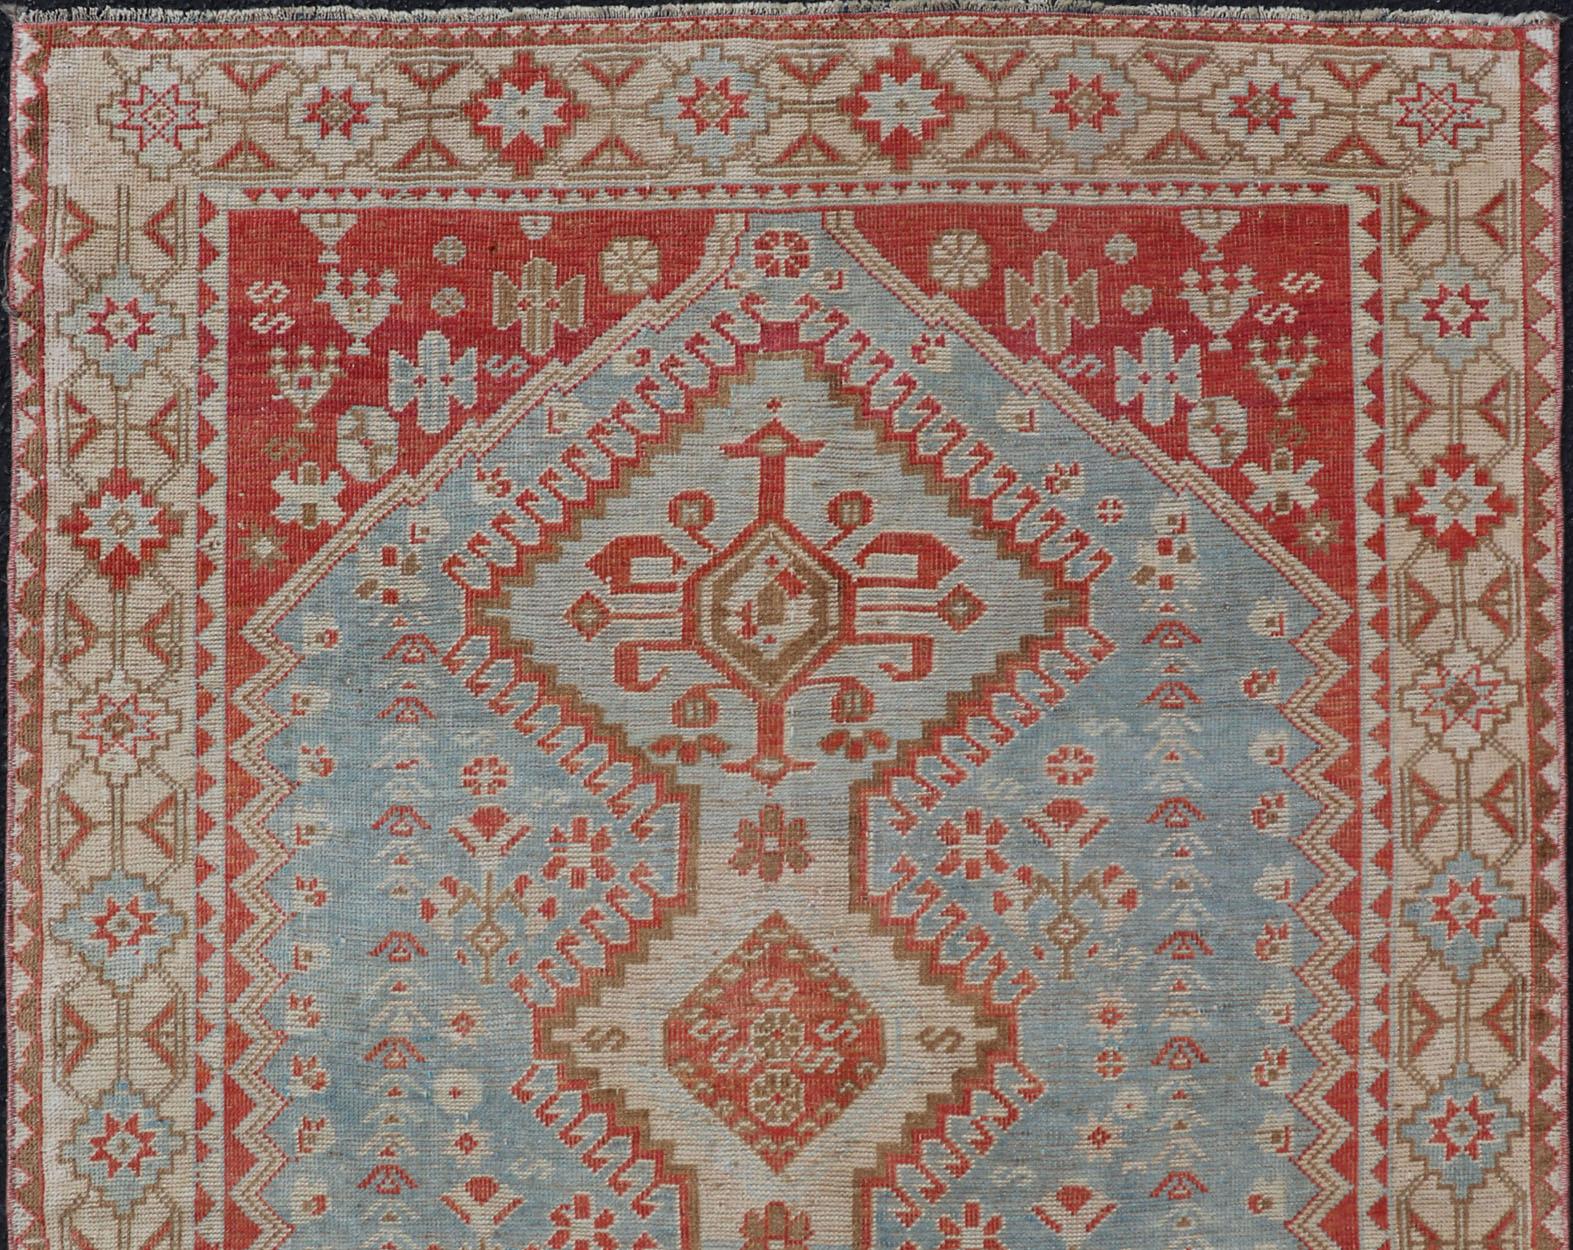 Antique Persian Shiraz rug with Center Medallions and Sub Geometric Design. Keivan Woven Arts / rug EMB-9708-P13900, country of origin / type: Iran / Shiraz, circa 1920.

This antique Persian Shiraz rug has been hand-knotted in wool and features an